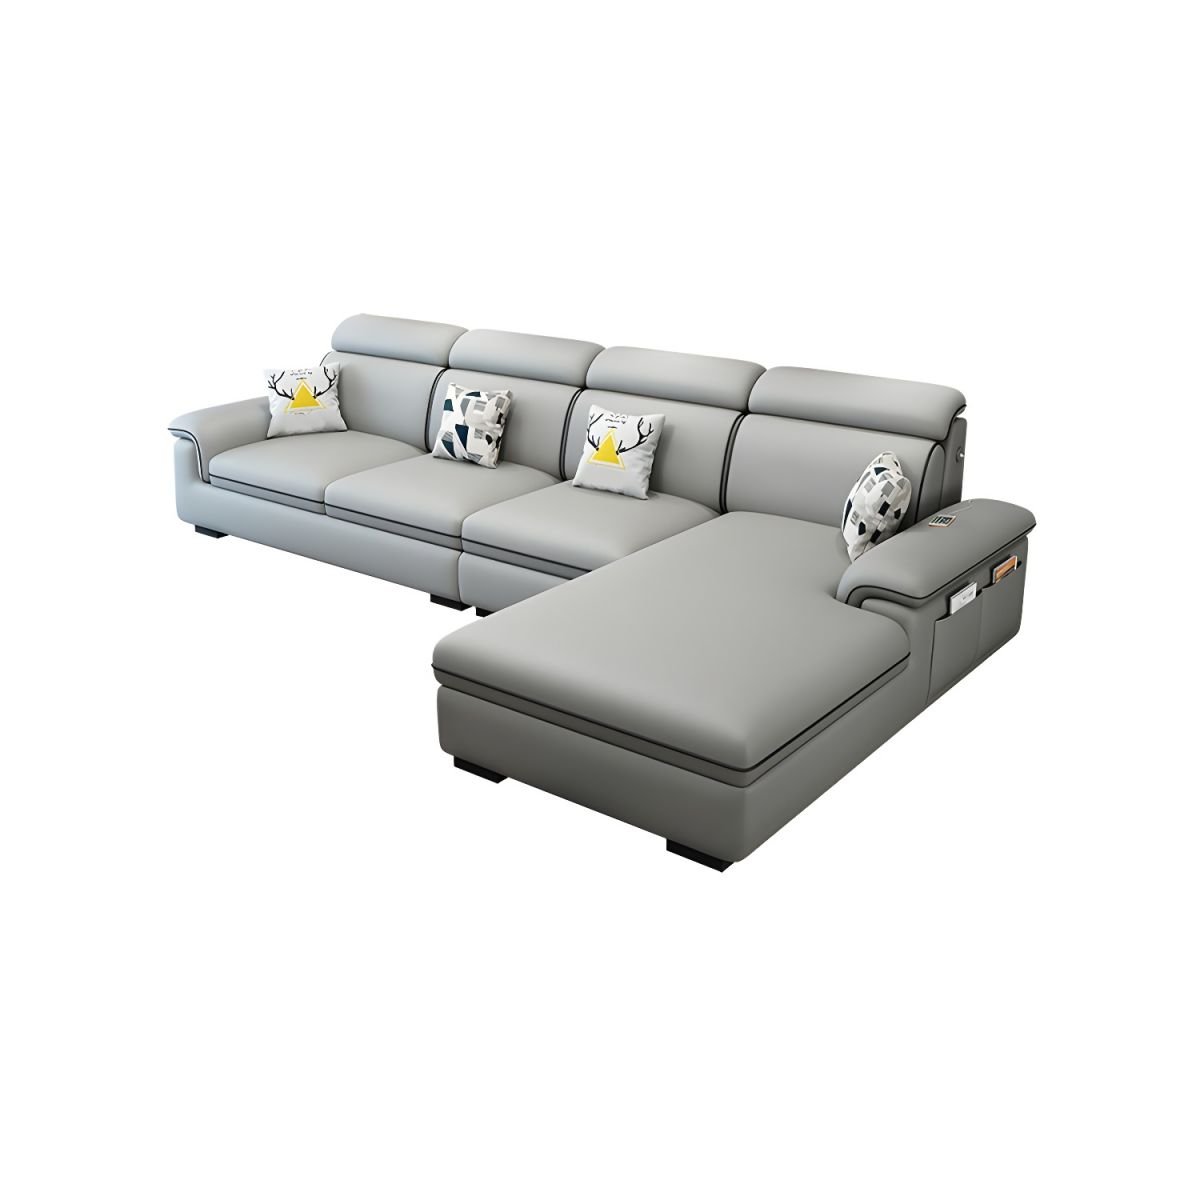 Wooden Modern 9 Feet L-Shape Sectionals No Distressing Seats 4 Storage Included Sofa Chaise - Right Tech Cloth Light Gray